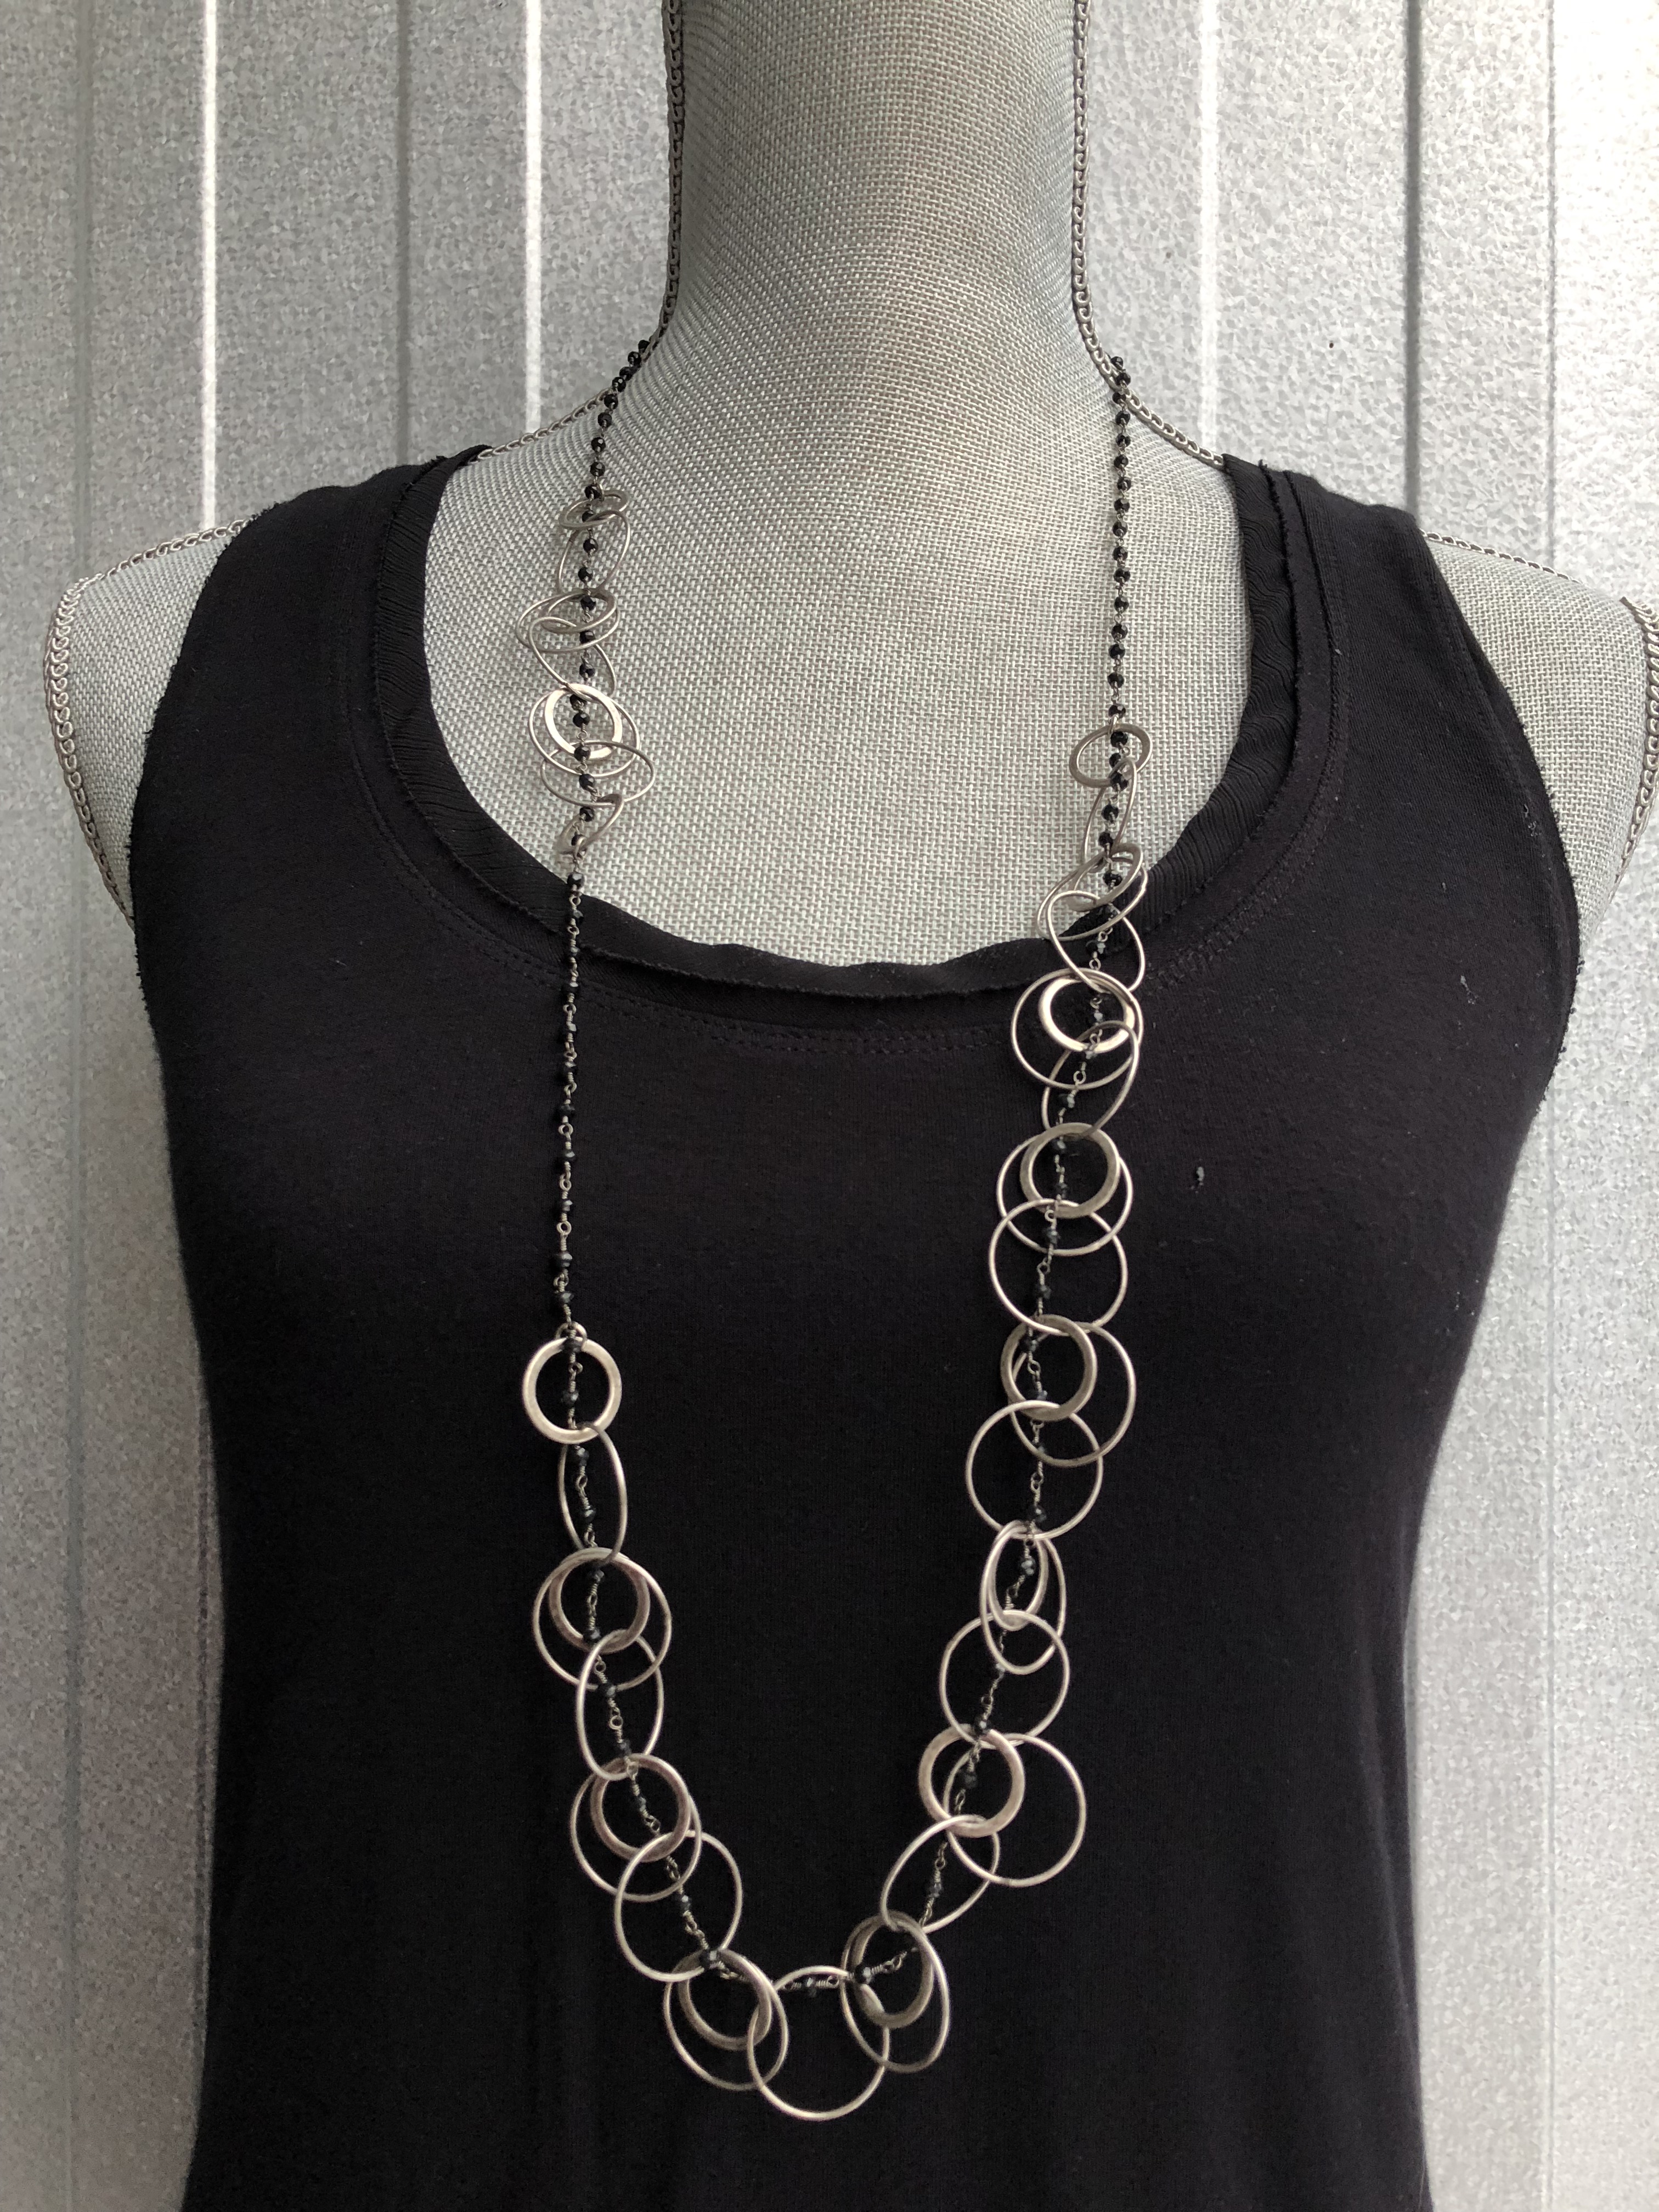 Onyx Large Link Chain Necklace - SASS Designs | Whistler BC